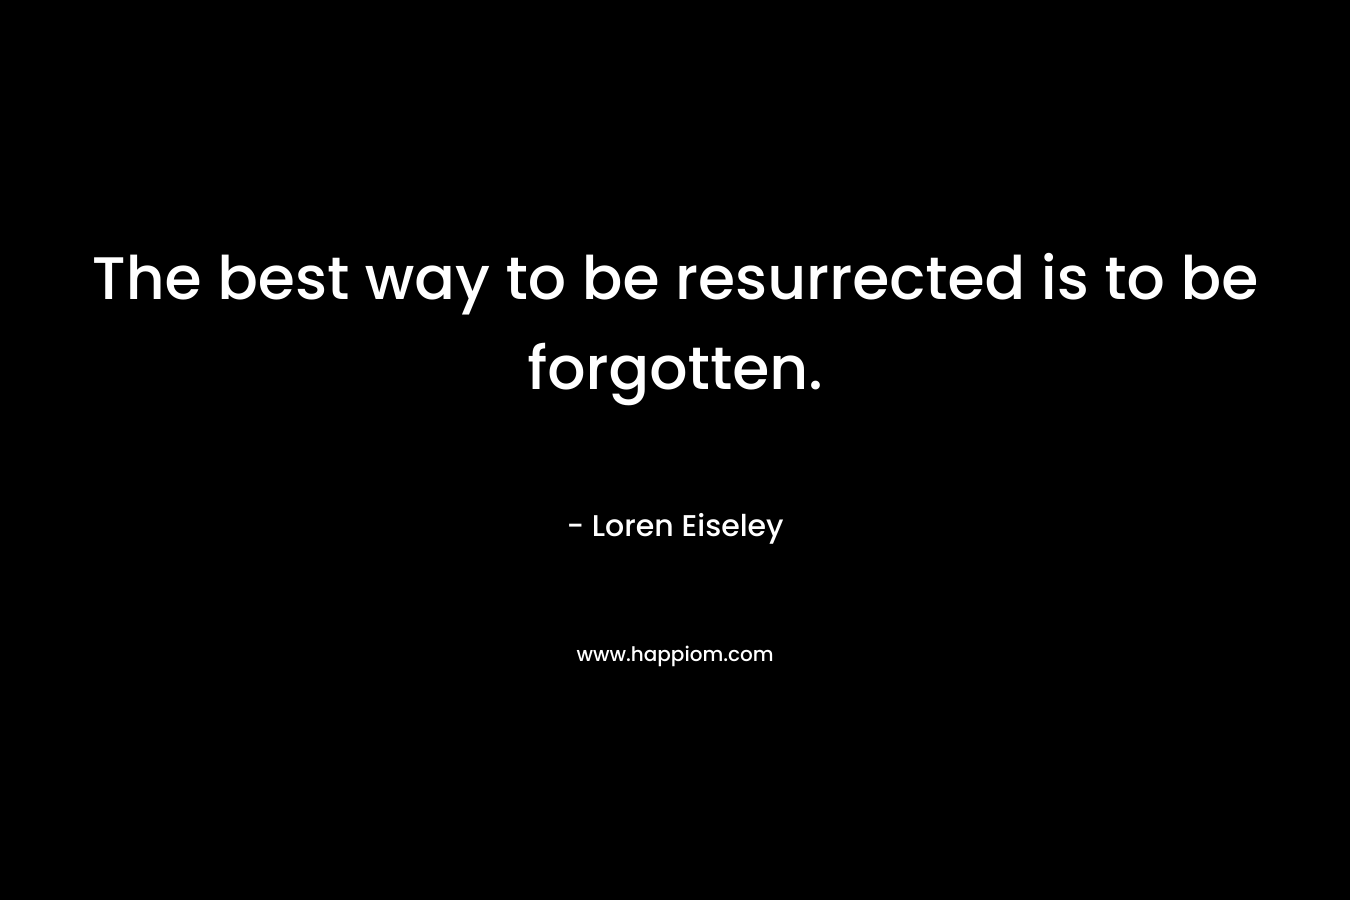 The best way to be resurrected is to be forgotten. – Loren Eiseley